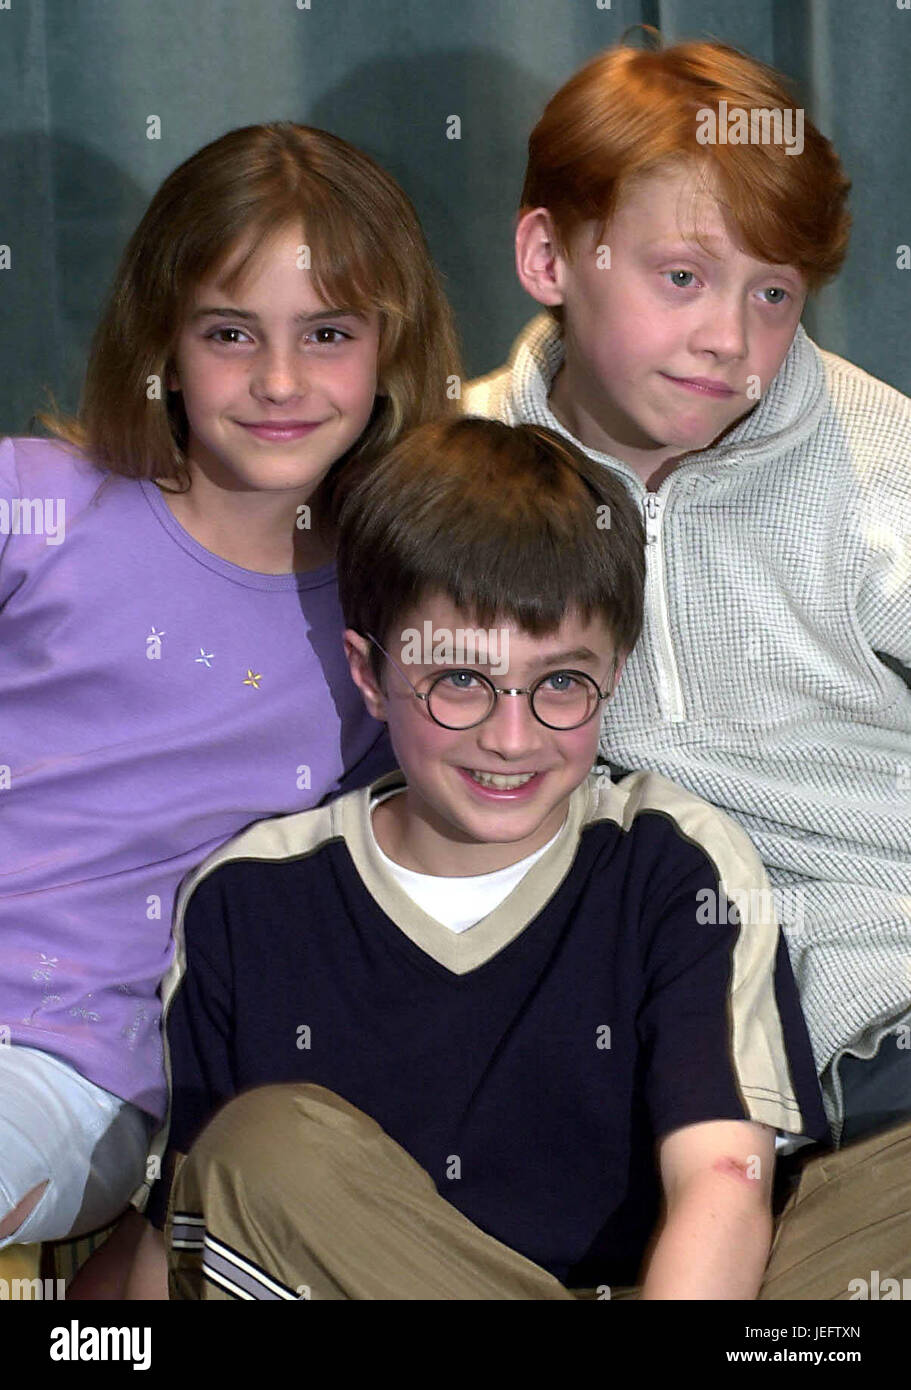 Embargoed to 0001 Monday June 26 File photo dated 23/08/00 of Harry Potter actors (left to right) Emma Watson (Hermione Granger), Daniel Radcliffe (Harry Potter) and Rupert Grint (Ron Weasley), as Harry Potter fans around the world will today celebrate the 20th anniversary of the first book about The Boy Who Lived. Stock Photo